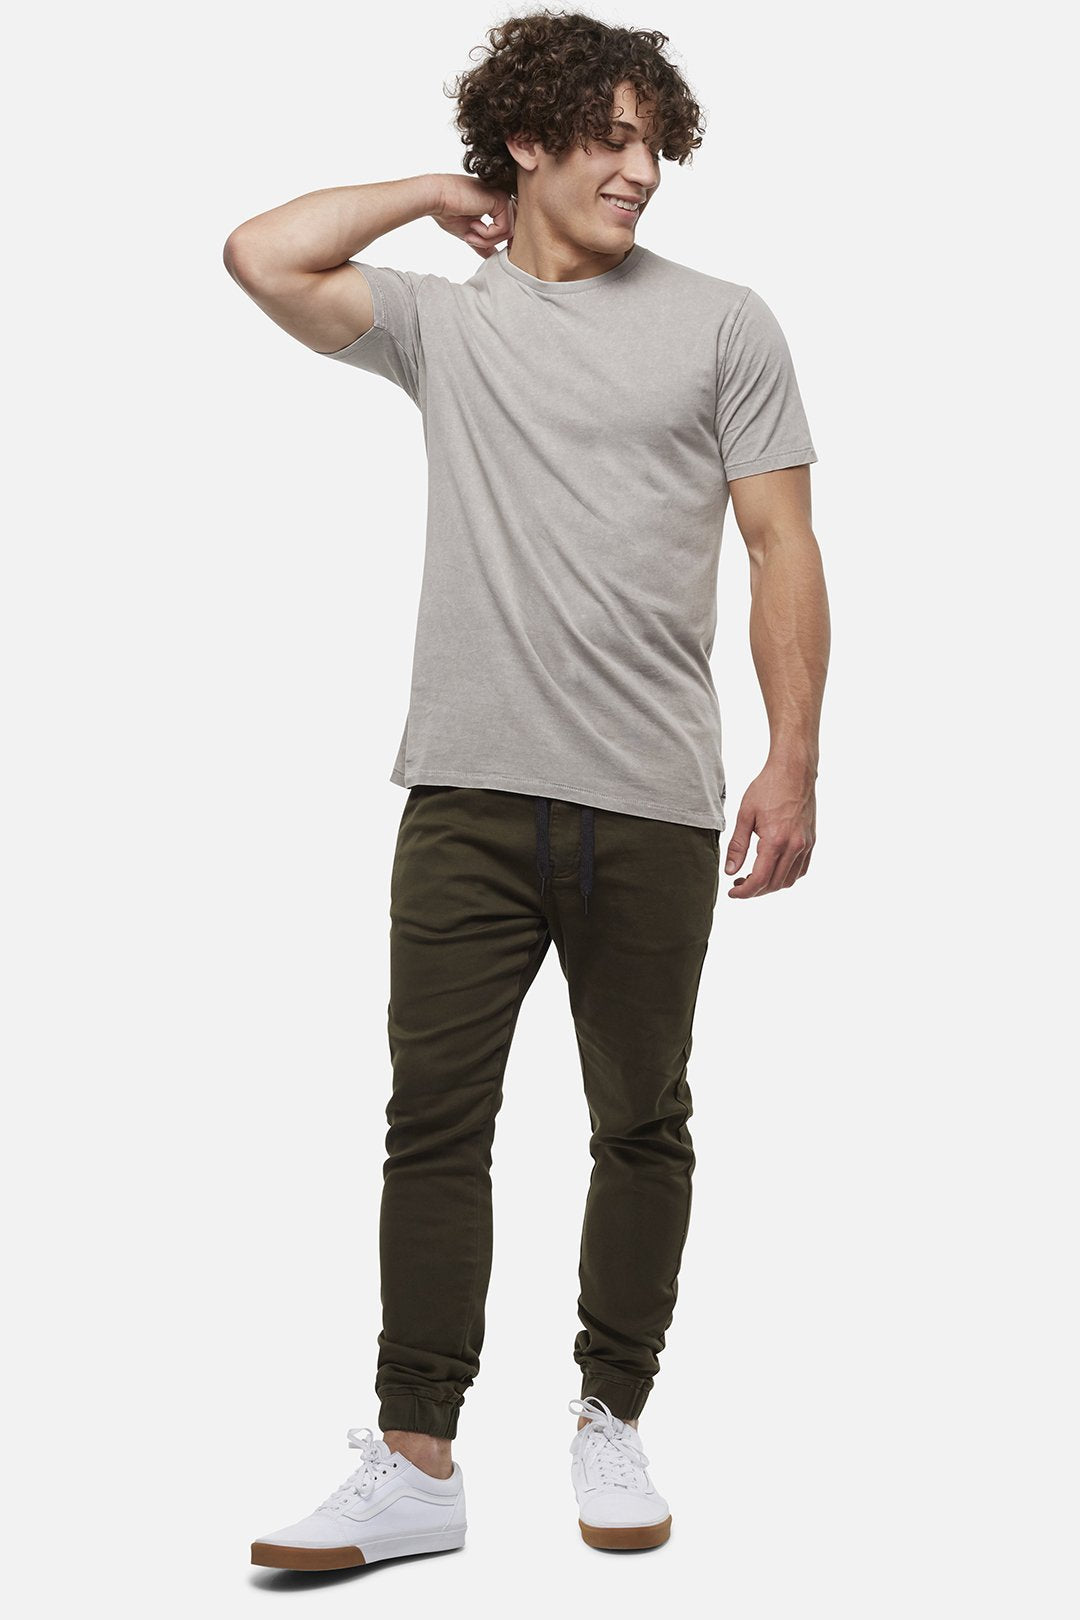 INDUSTRIE THE DRIFTER CHINO PANT ARMY GREEN